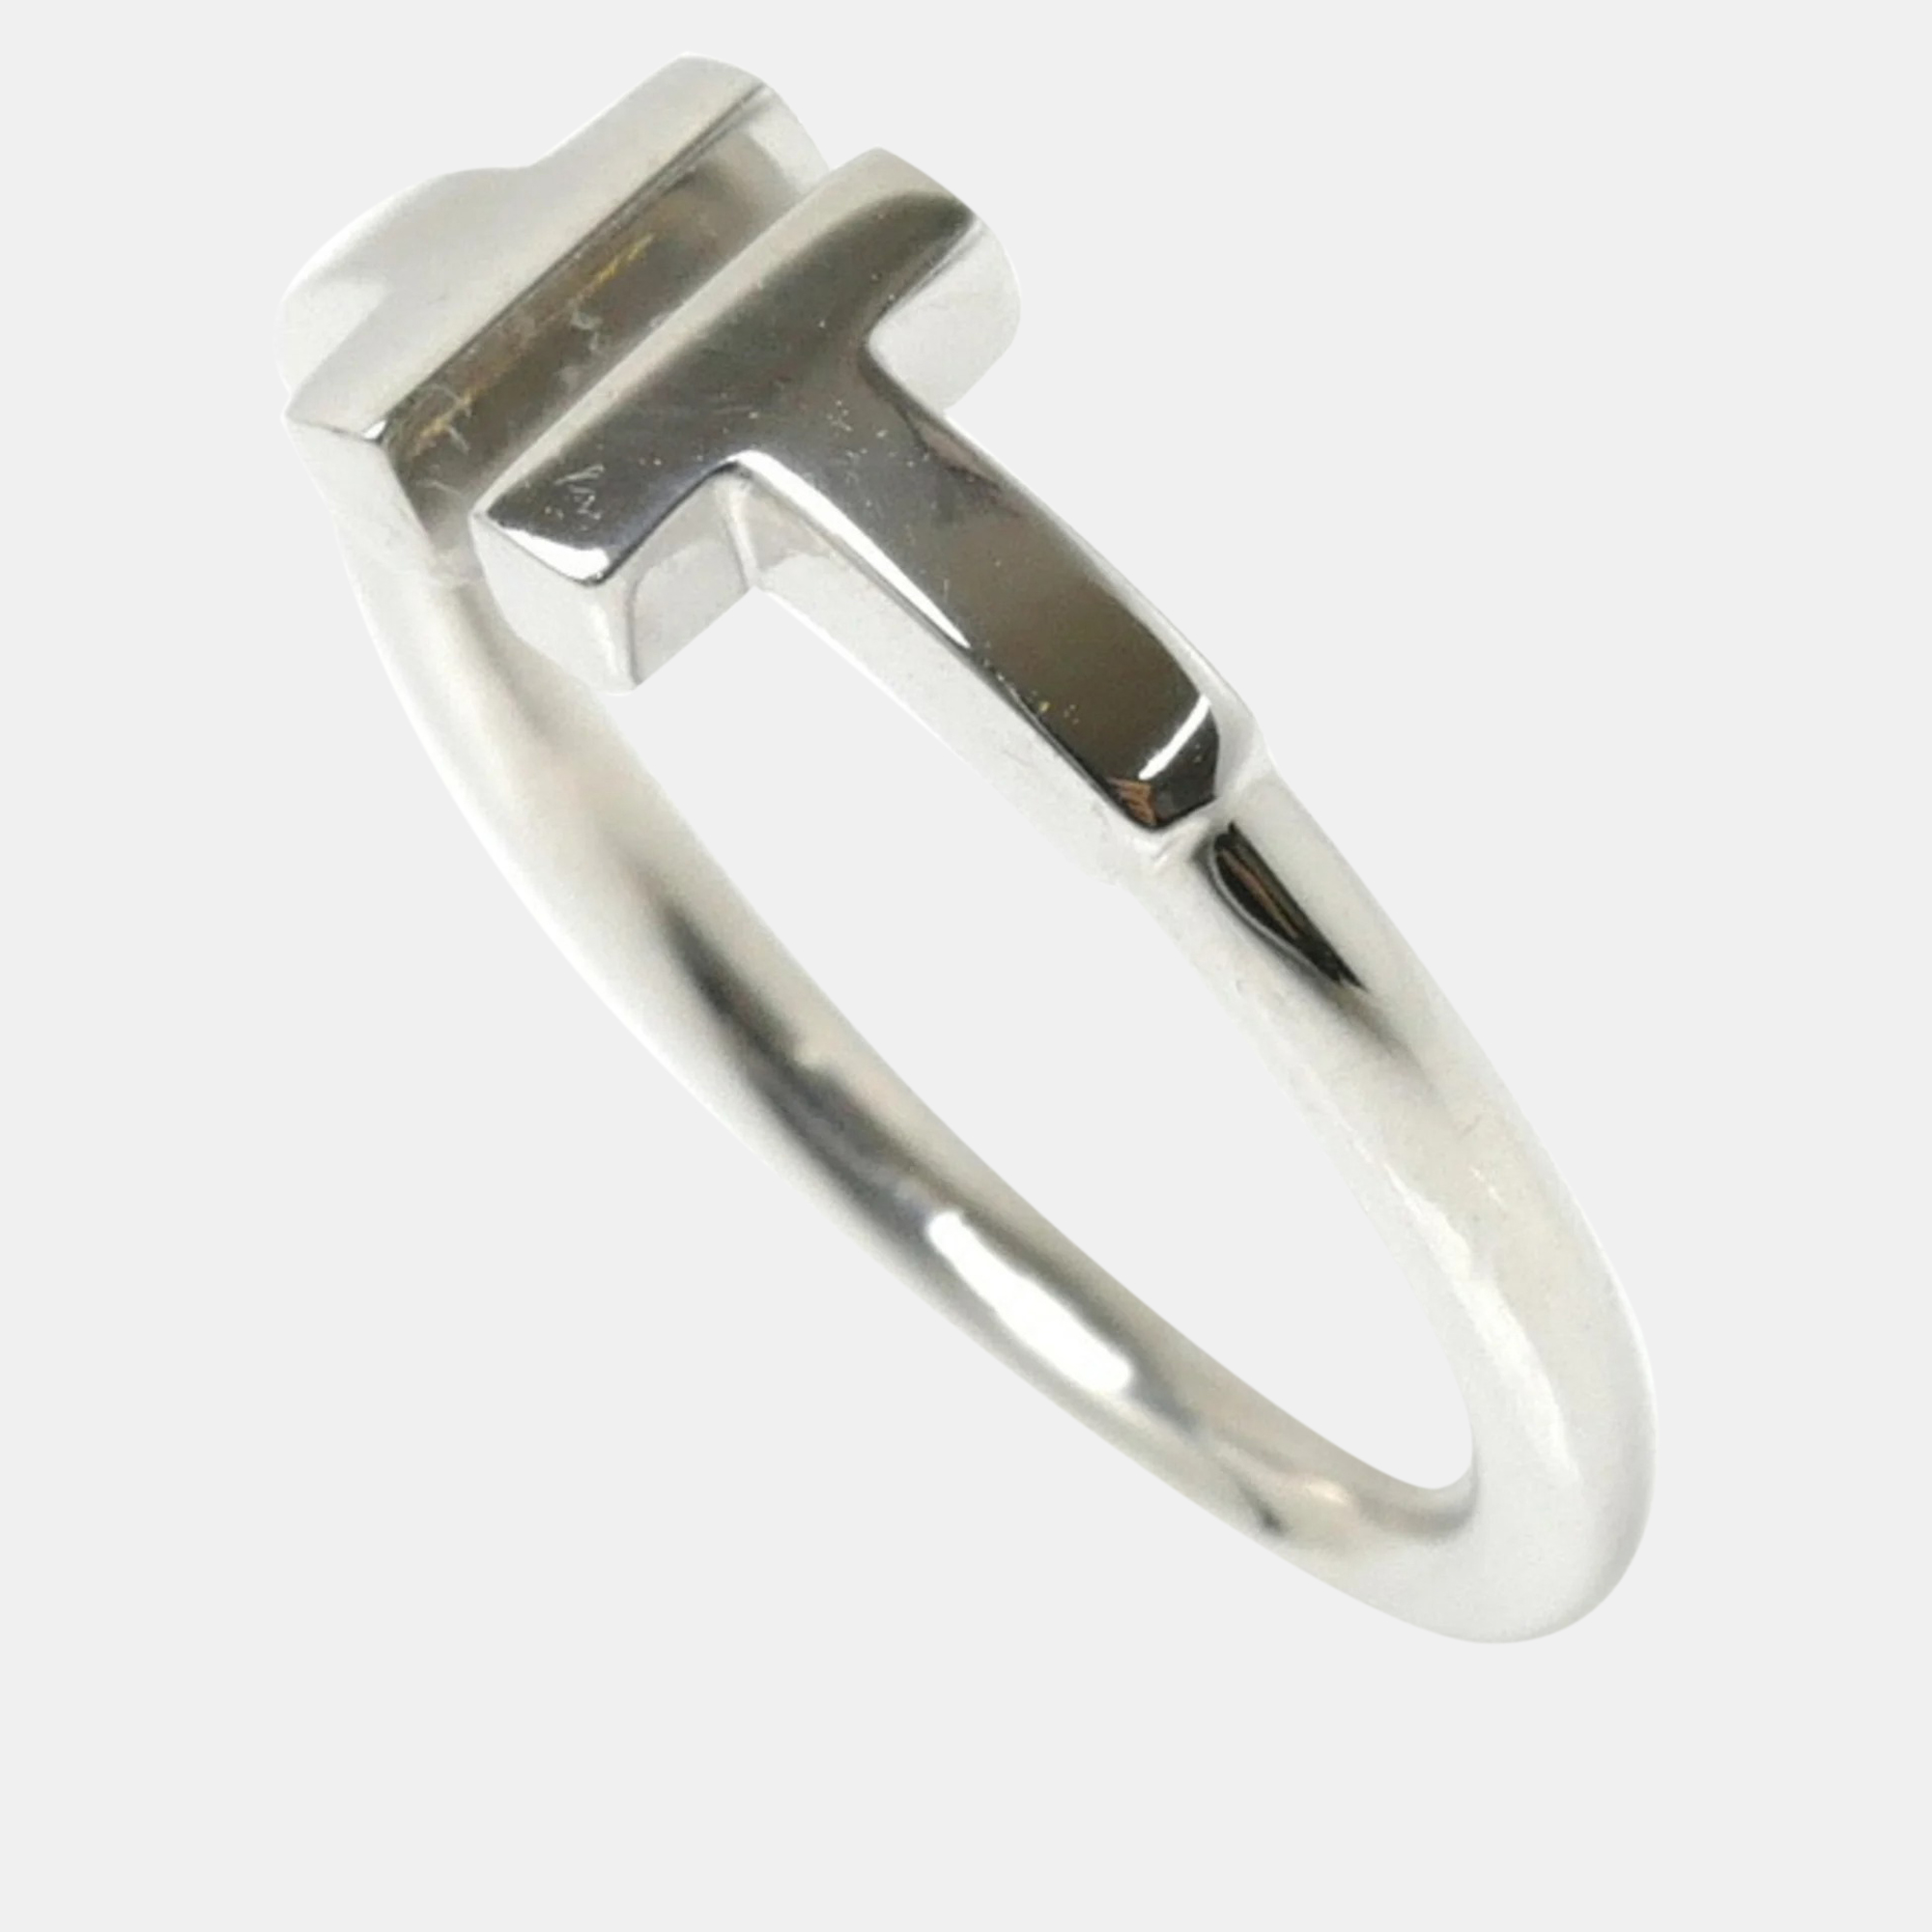 Tiffany & Co. 18K White Gold T Wire Band Ring EU 54.5